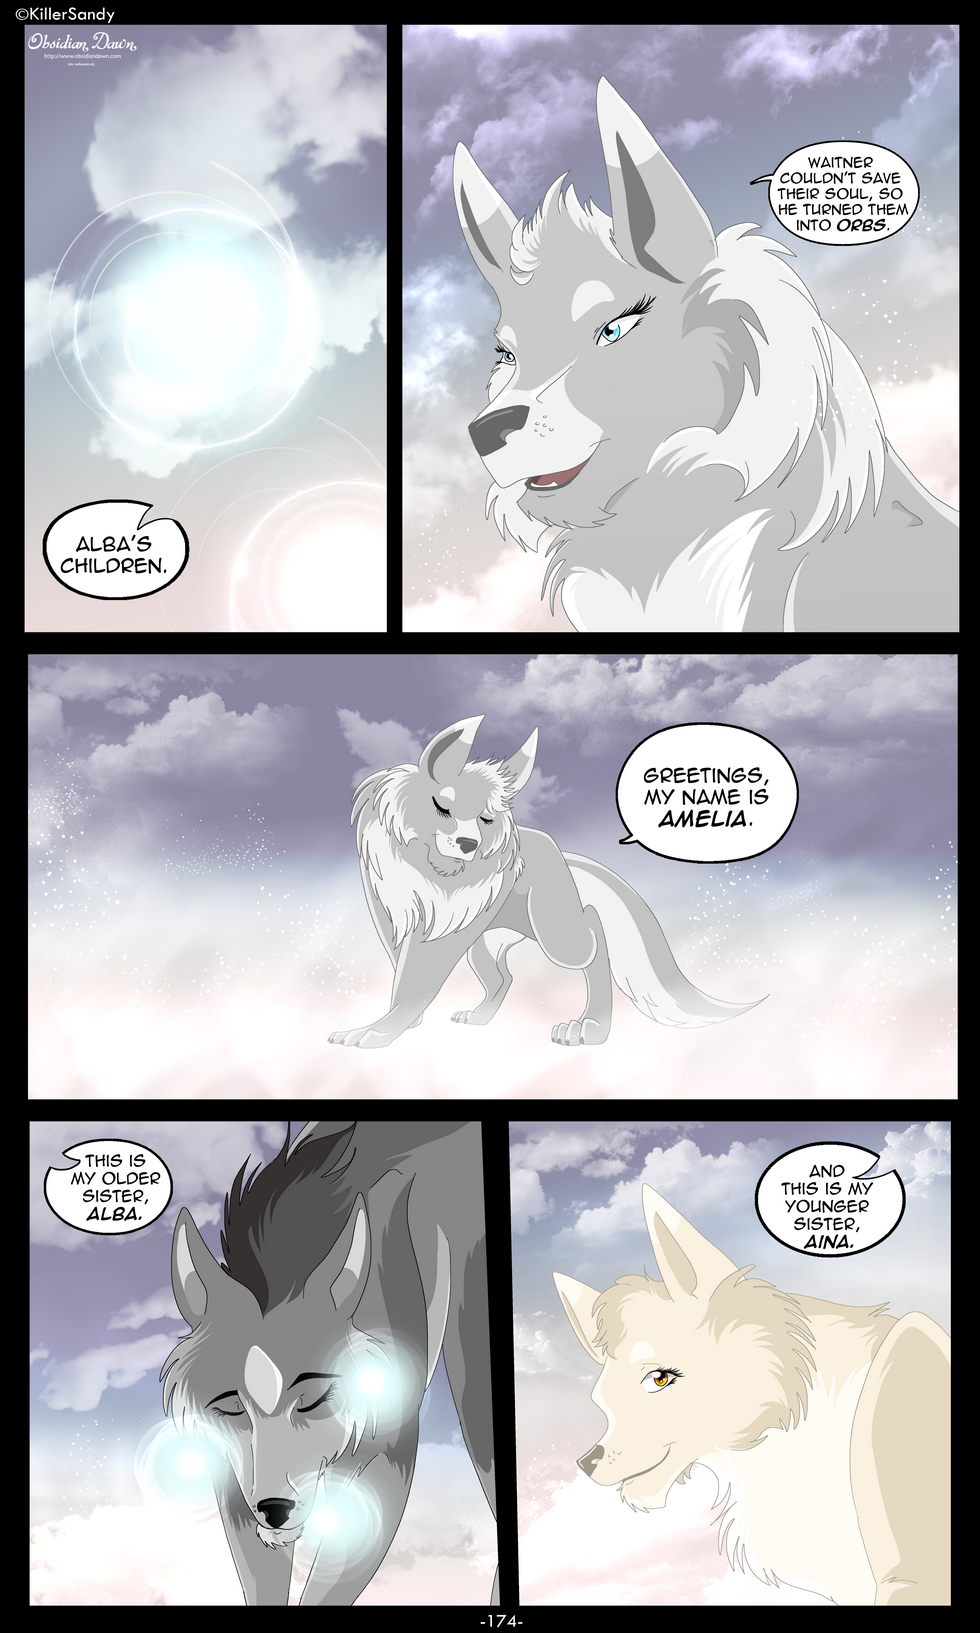 The Prince of the Moonlight Stone page 174